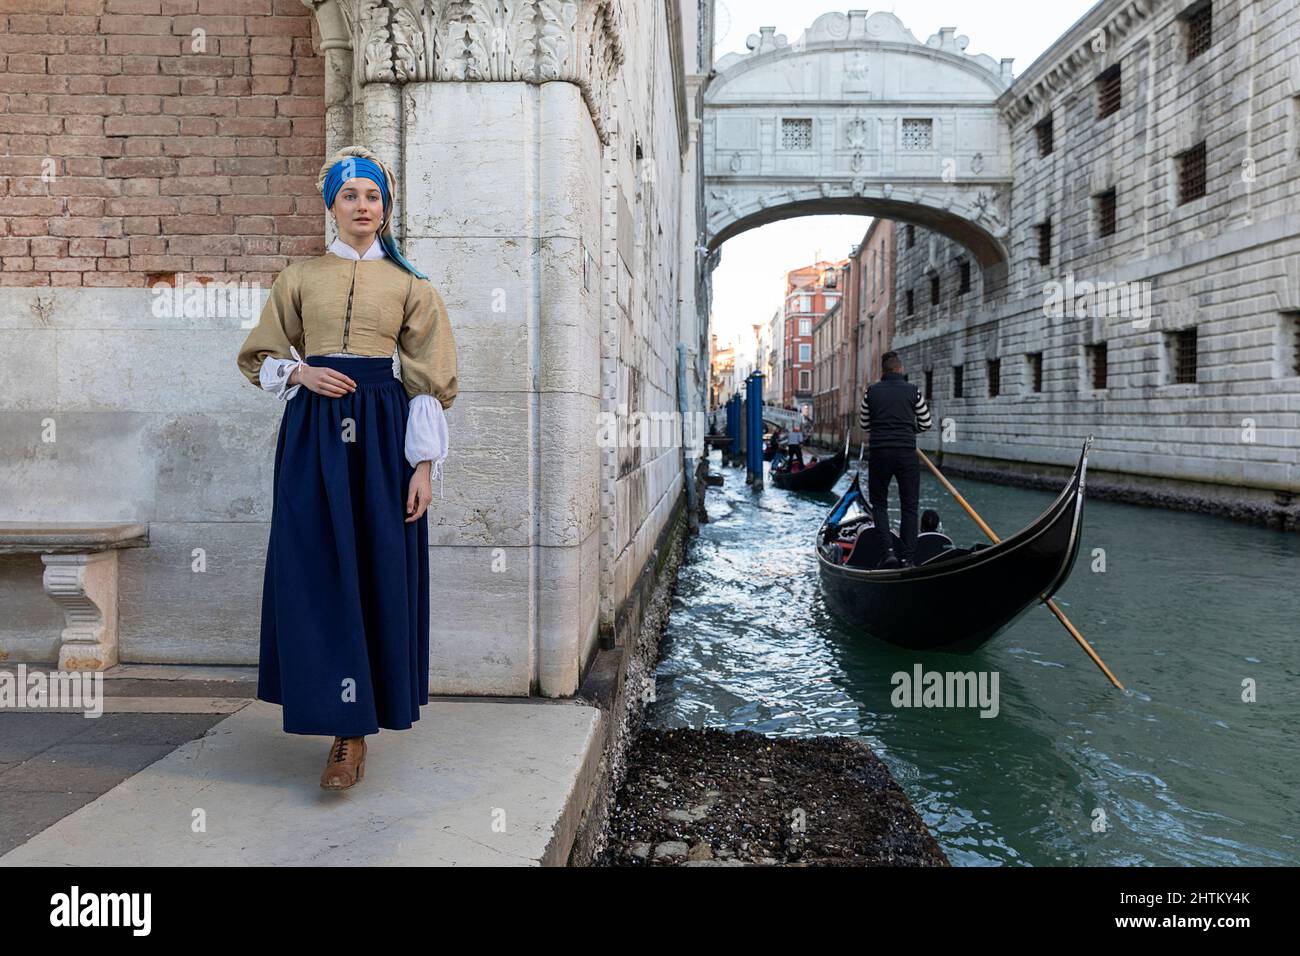 Woman in a beautiful traditional venetian costume and mask posing like Vermeer’s Girl With a Pearl Earring near Ponte della Paglia, Venice carneval Stock Photo